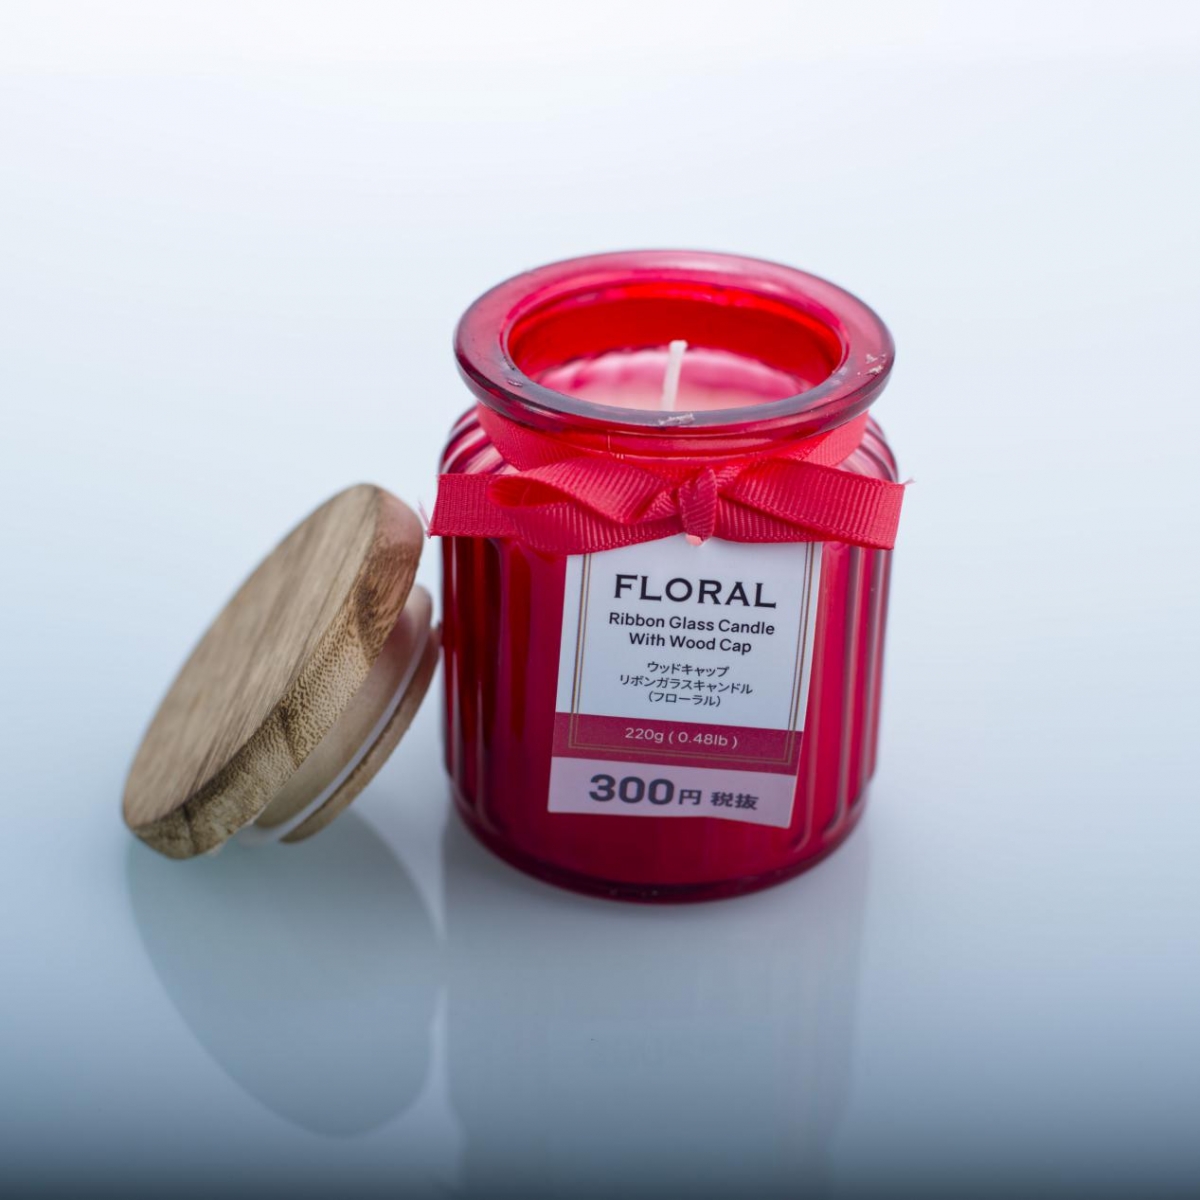 Ribbon Glass Candles -Soy Wax ,Floral Fragrance Candles ,Red Glass Jar ,Wood Cap ,China Factory Price-HOWCANDLE-Candles,Scented Candles,Aromatherapy Candles,Soy Candles,Vegan Candles,Jar Candles,Pillar Candles,Candle Gift Sets,Essential Oils,Reed Diffuser,Candle Holder,